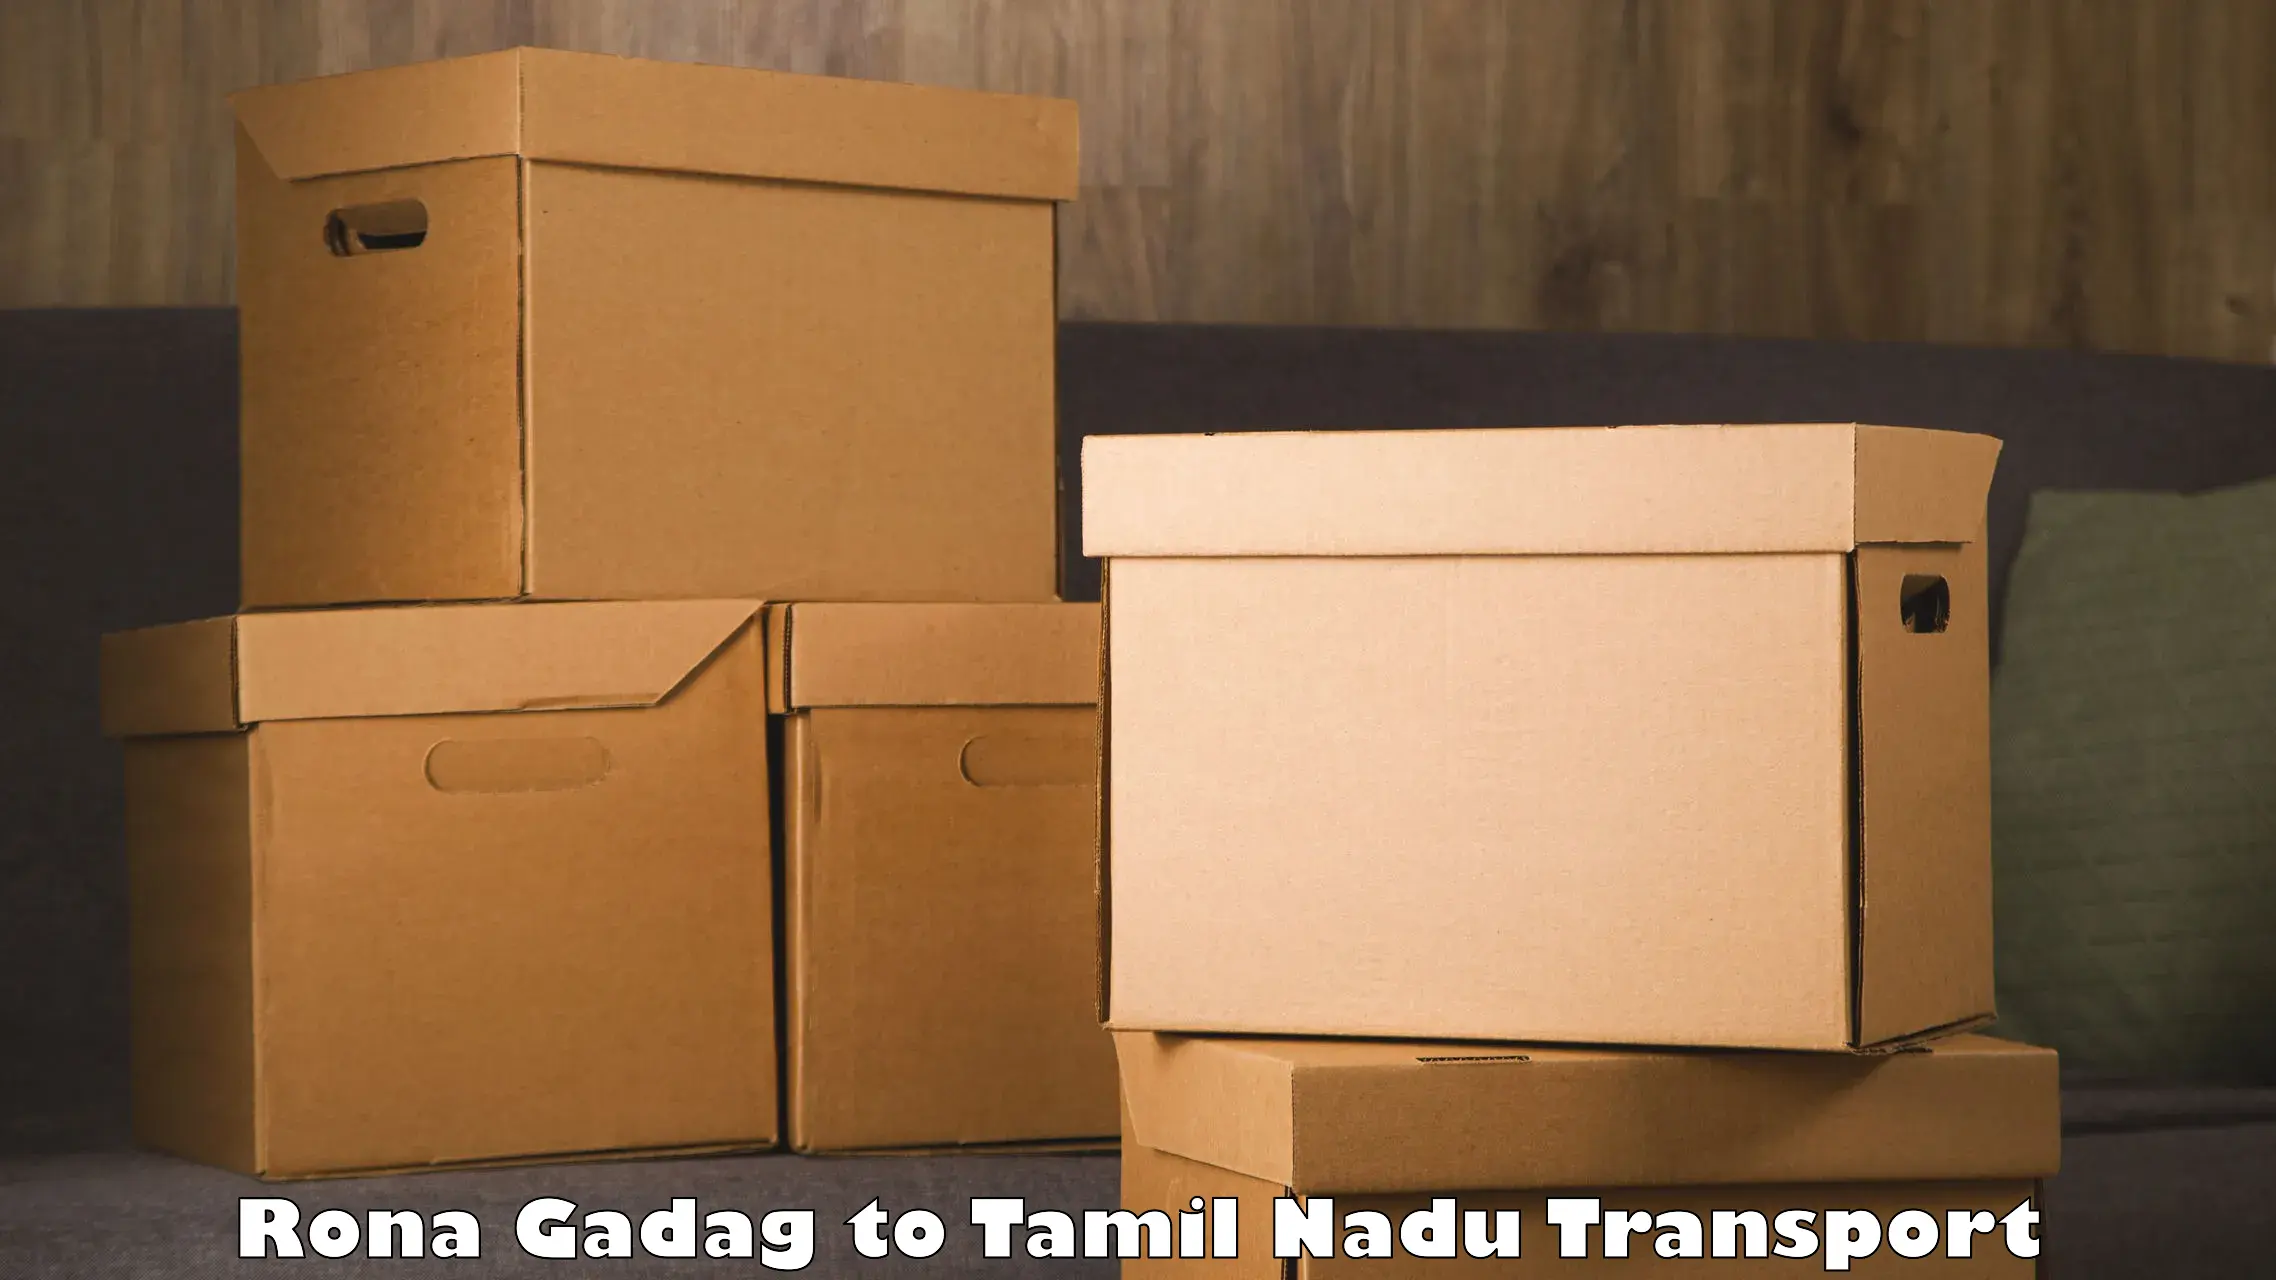 Nearby transport service Rona Gadag to Thuraiyur